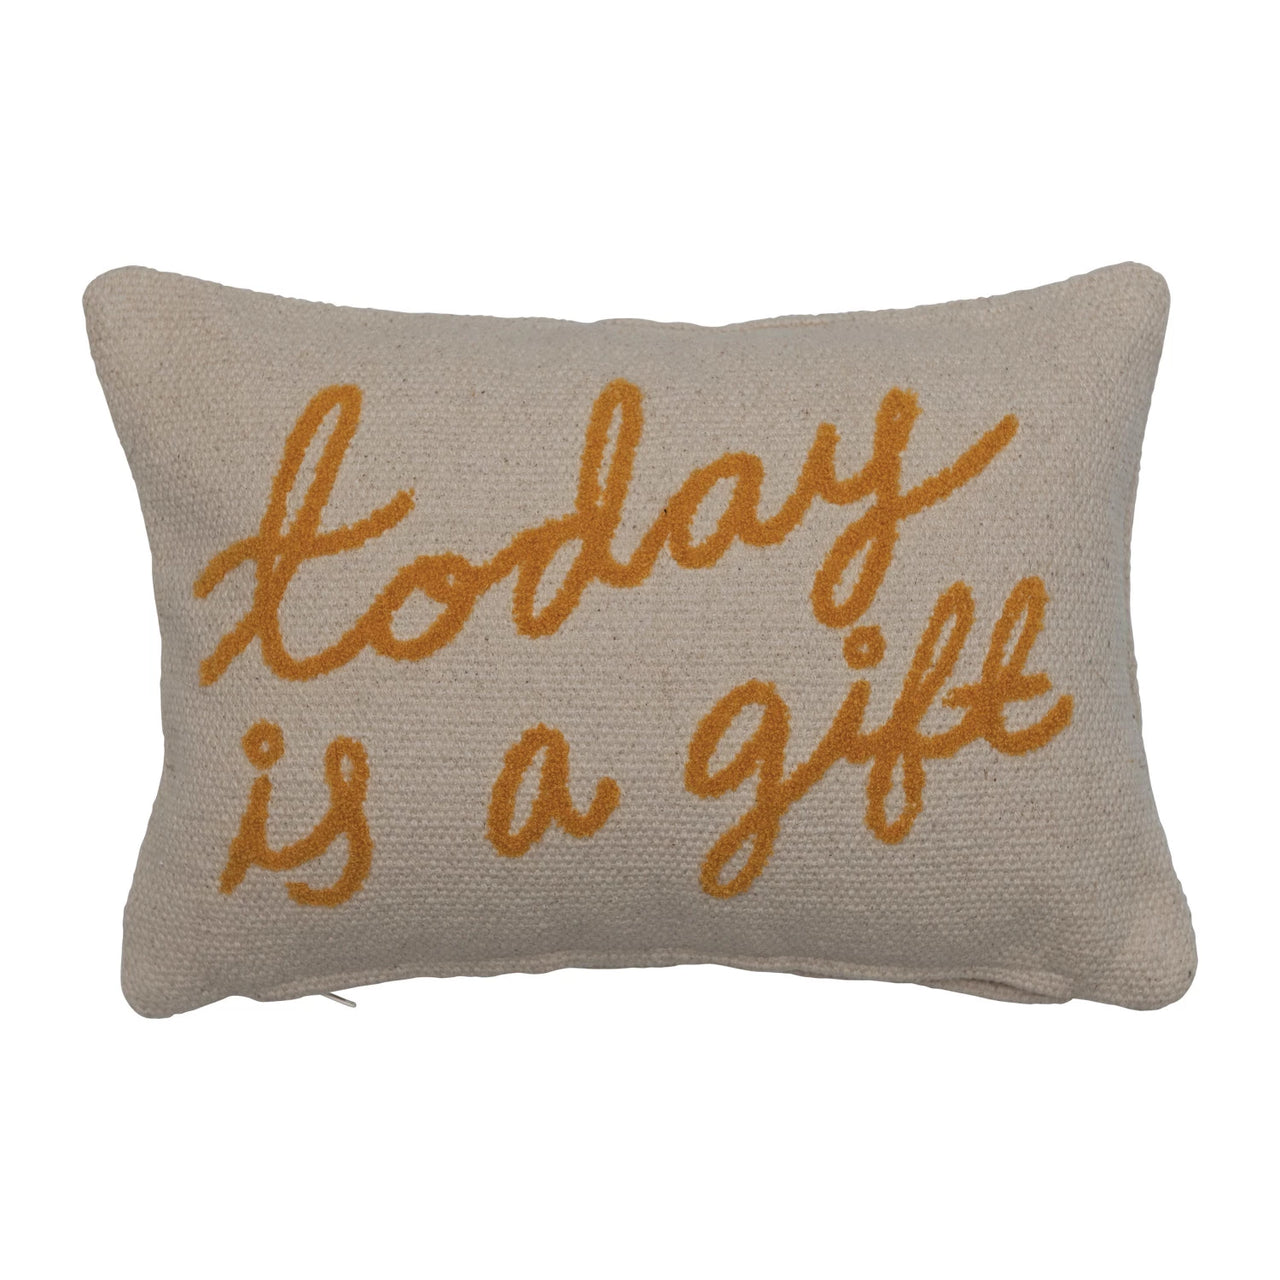 "Today is a Gift" Embroidered Lumbar Pillow